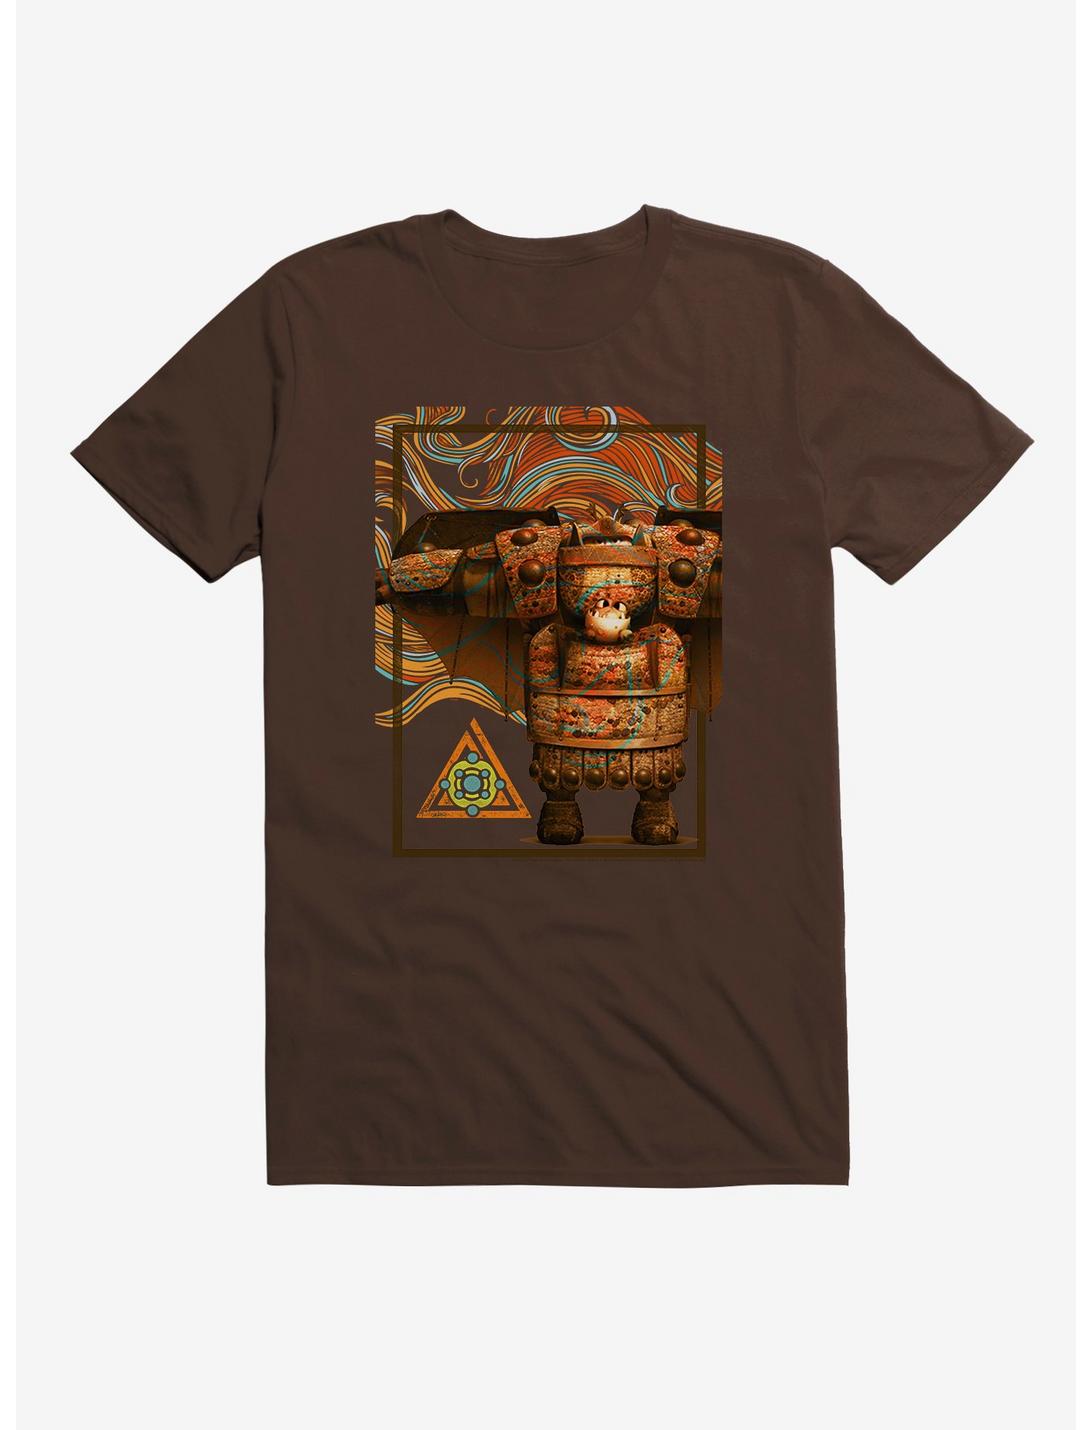 How To Train Your Dragon Fishlegs T-Shirt, CHOCOLATE, hi-res